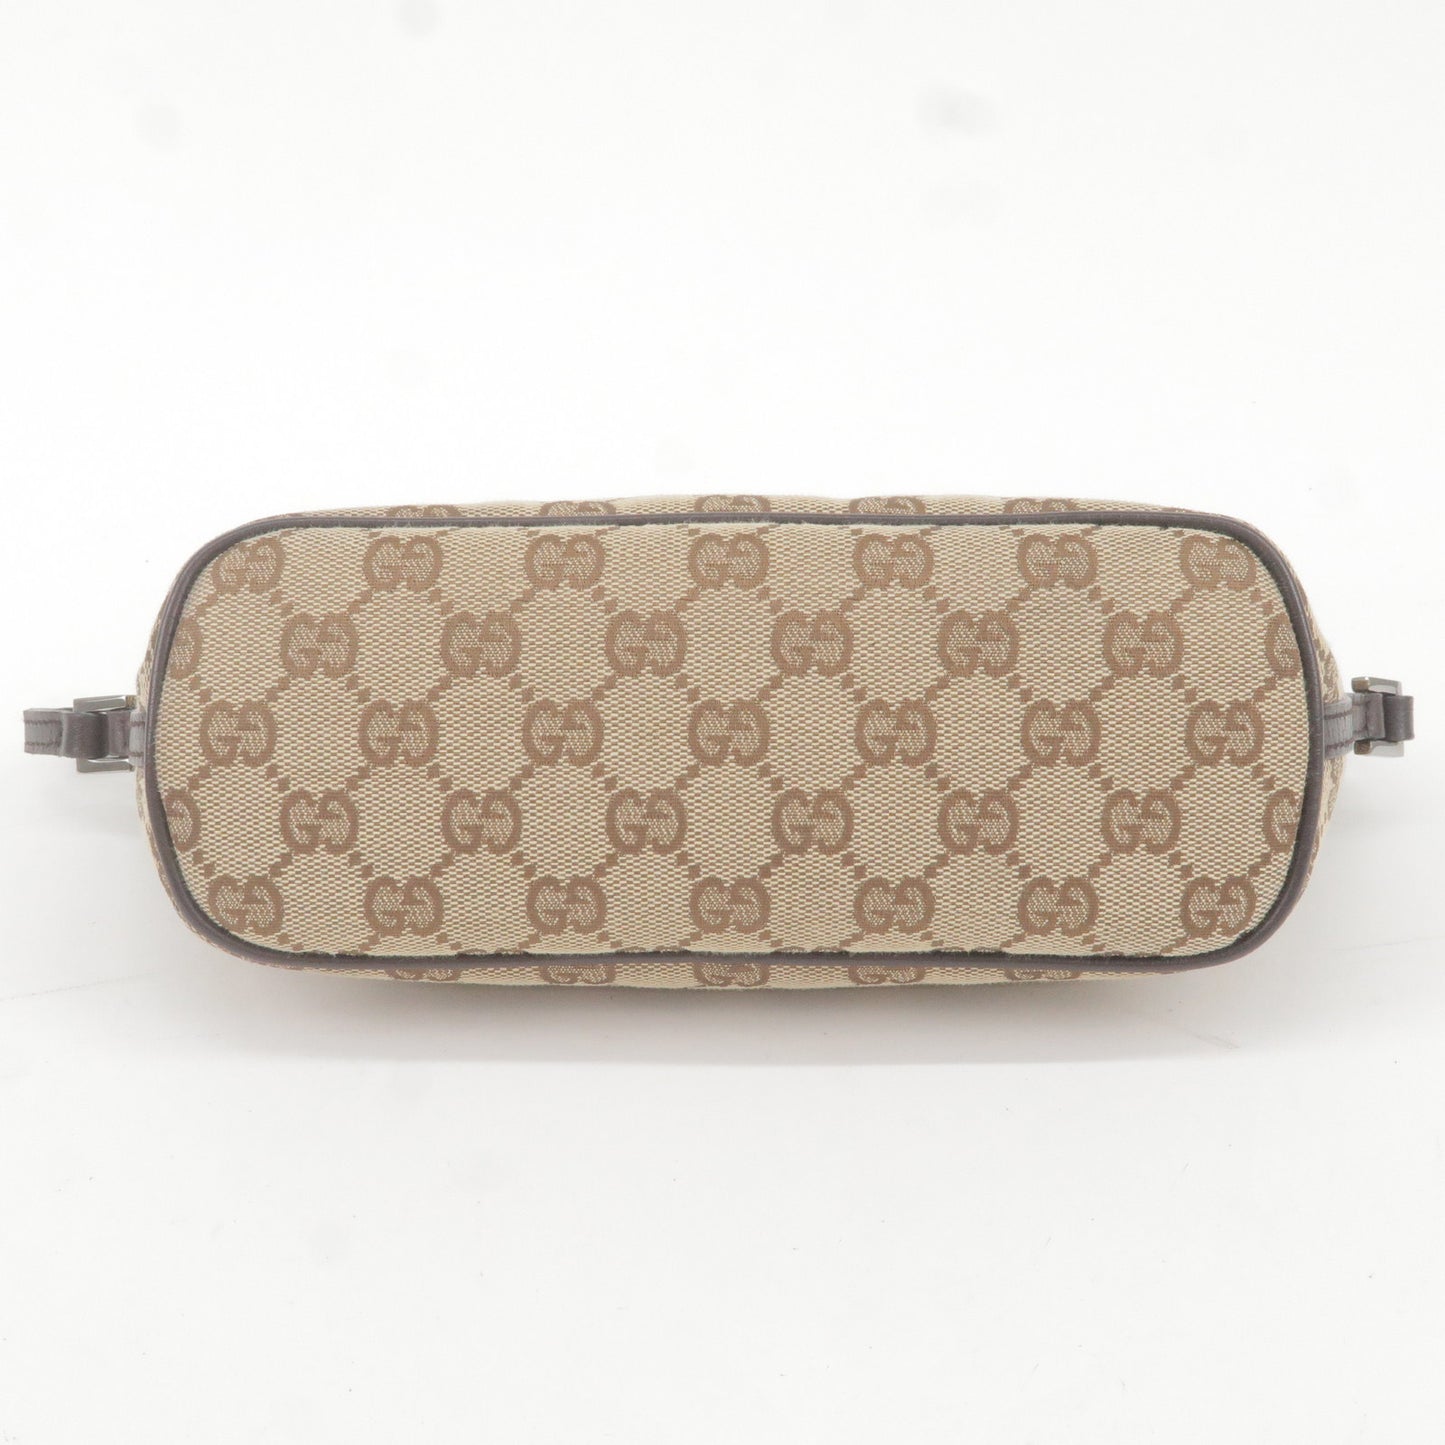 GUCCI GG Canvas Leather Boat Bag Hand Bag Beige Brown 07198